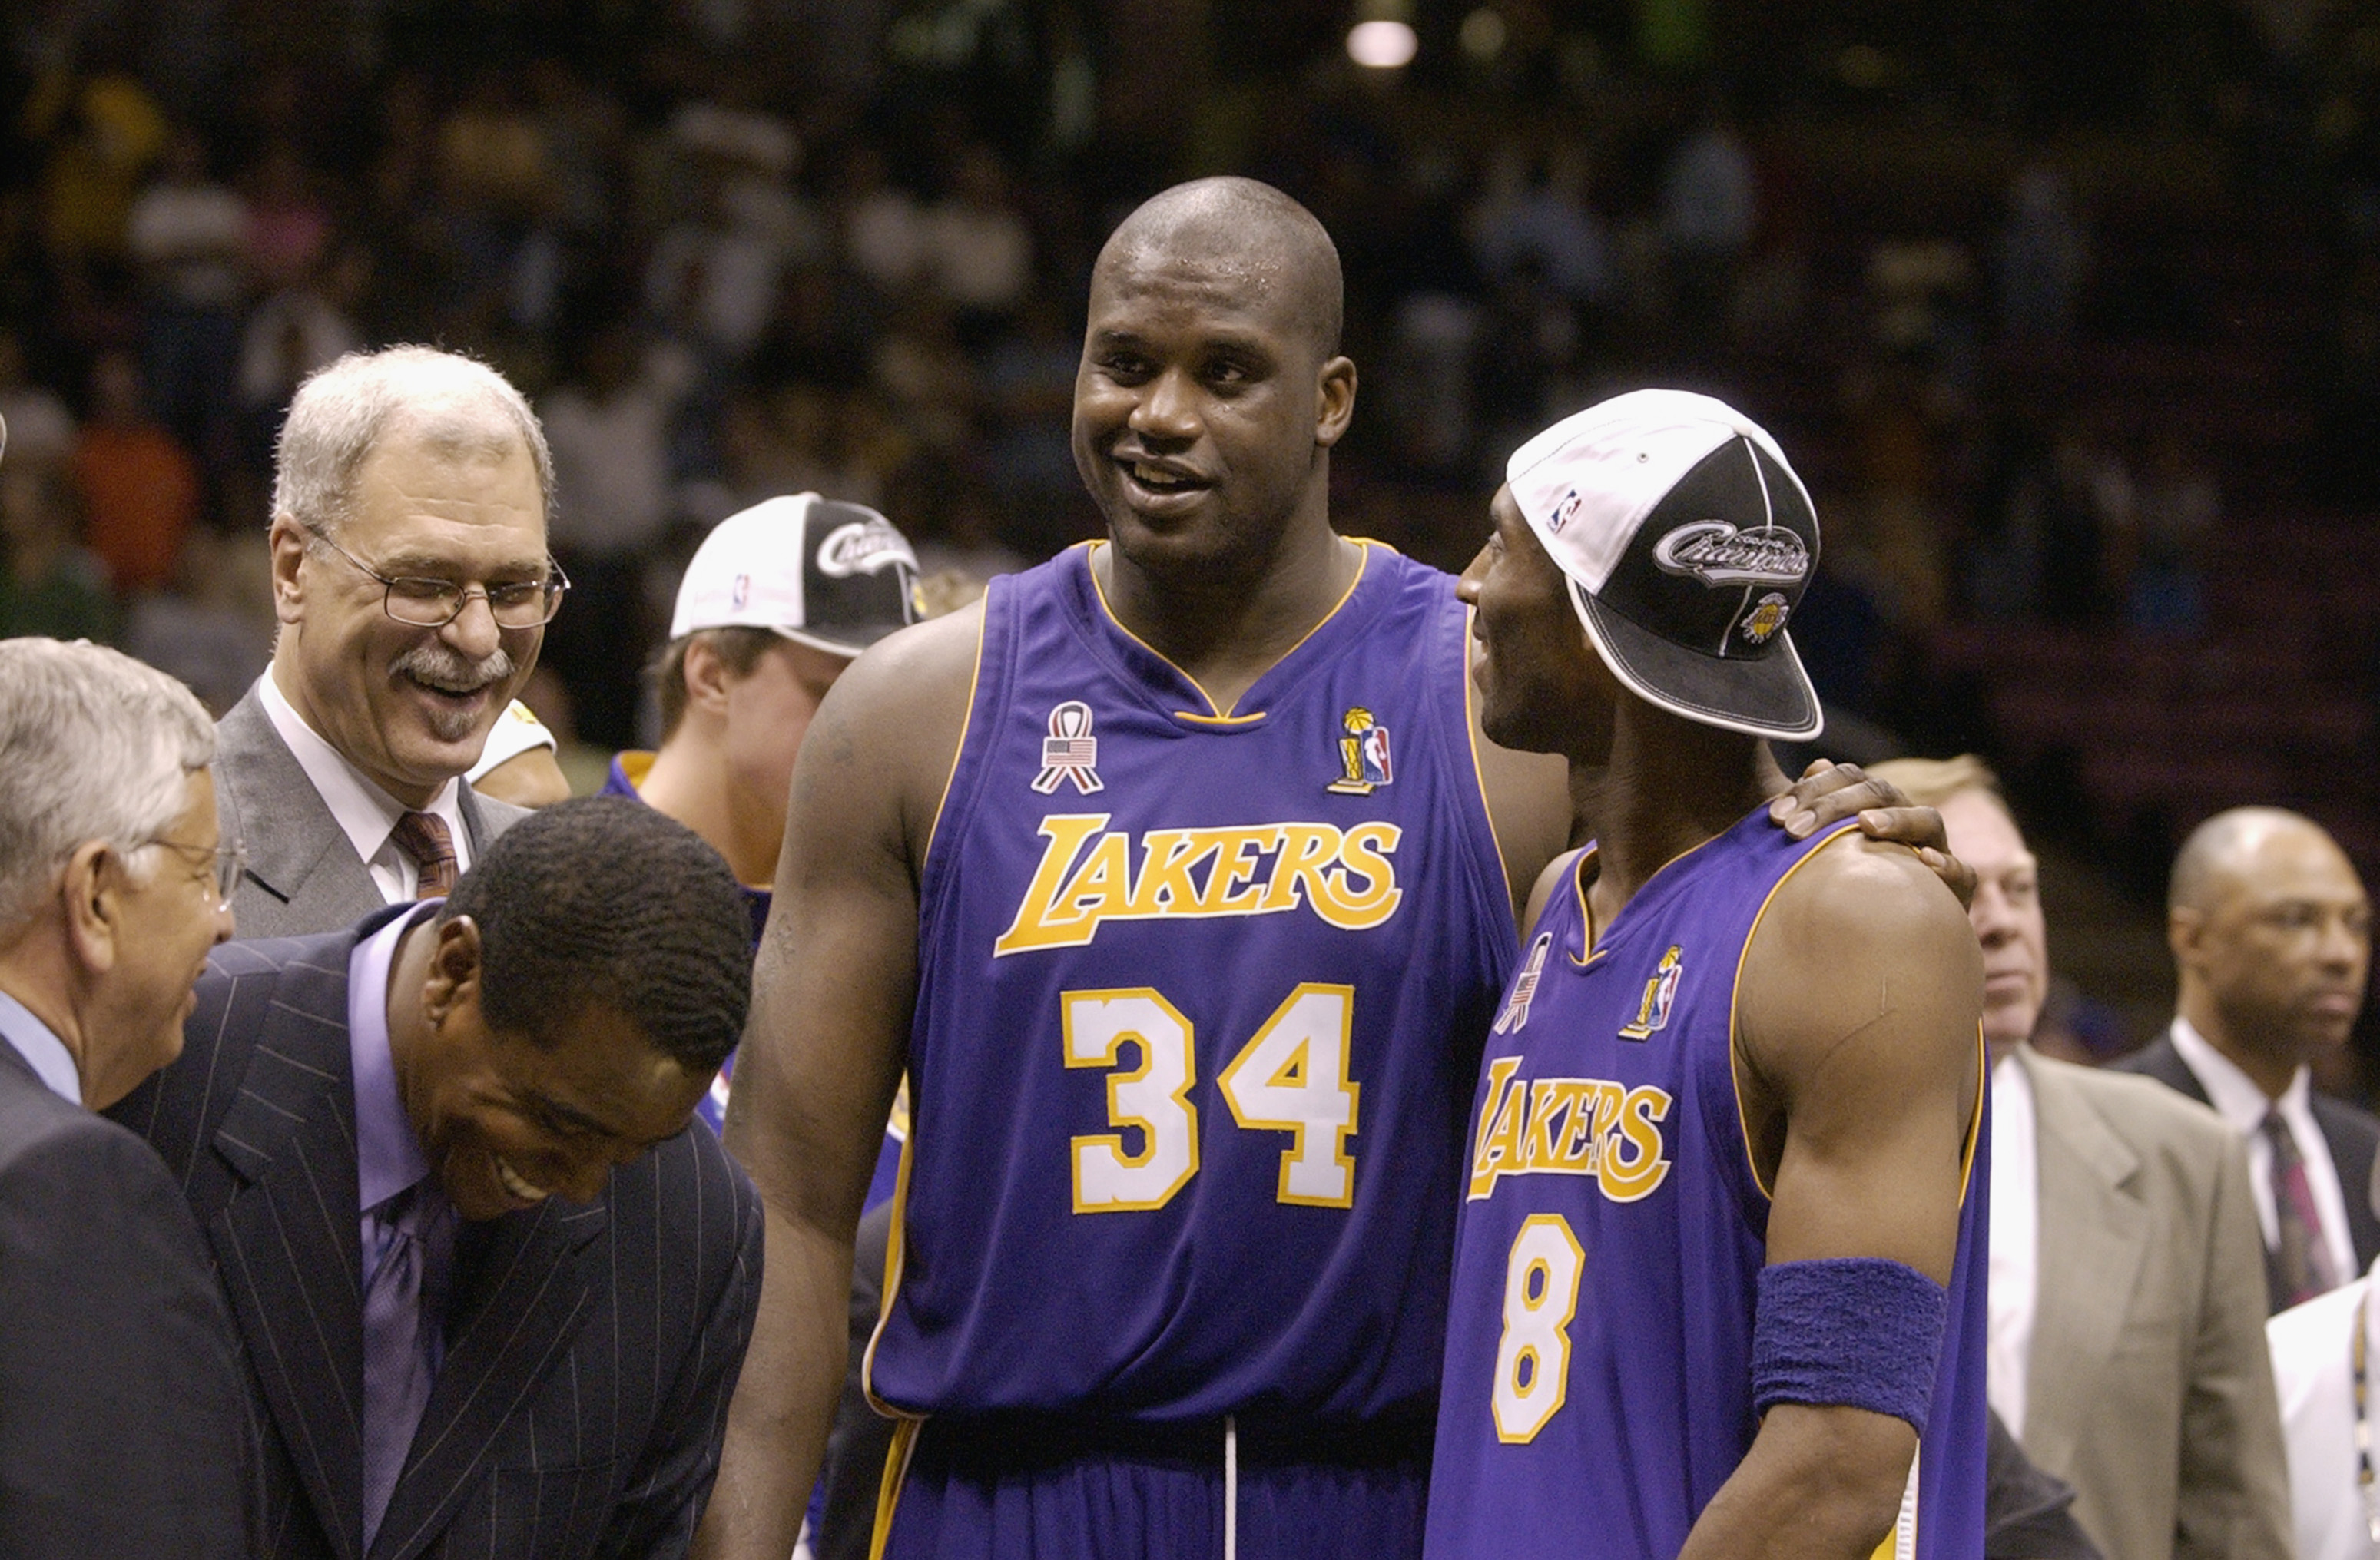 Shaquille O'Neal and Kobe Bryant of the Los Angeles Lakers look on